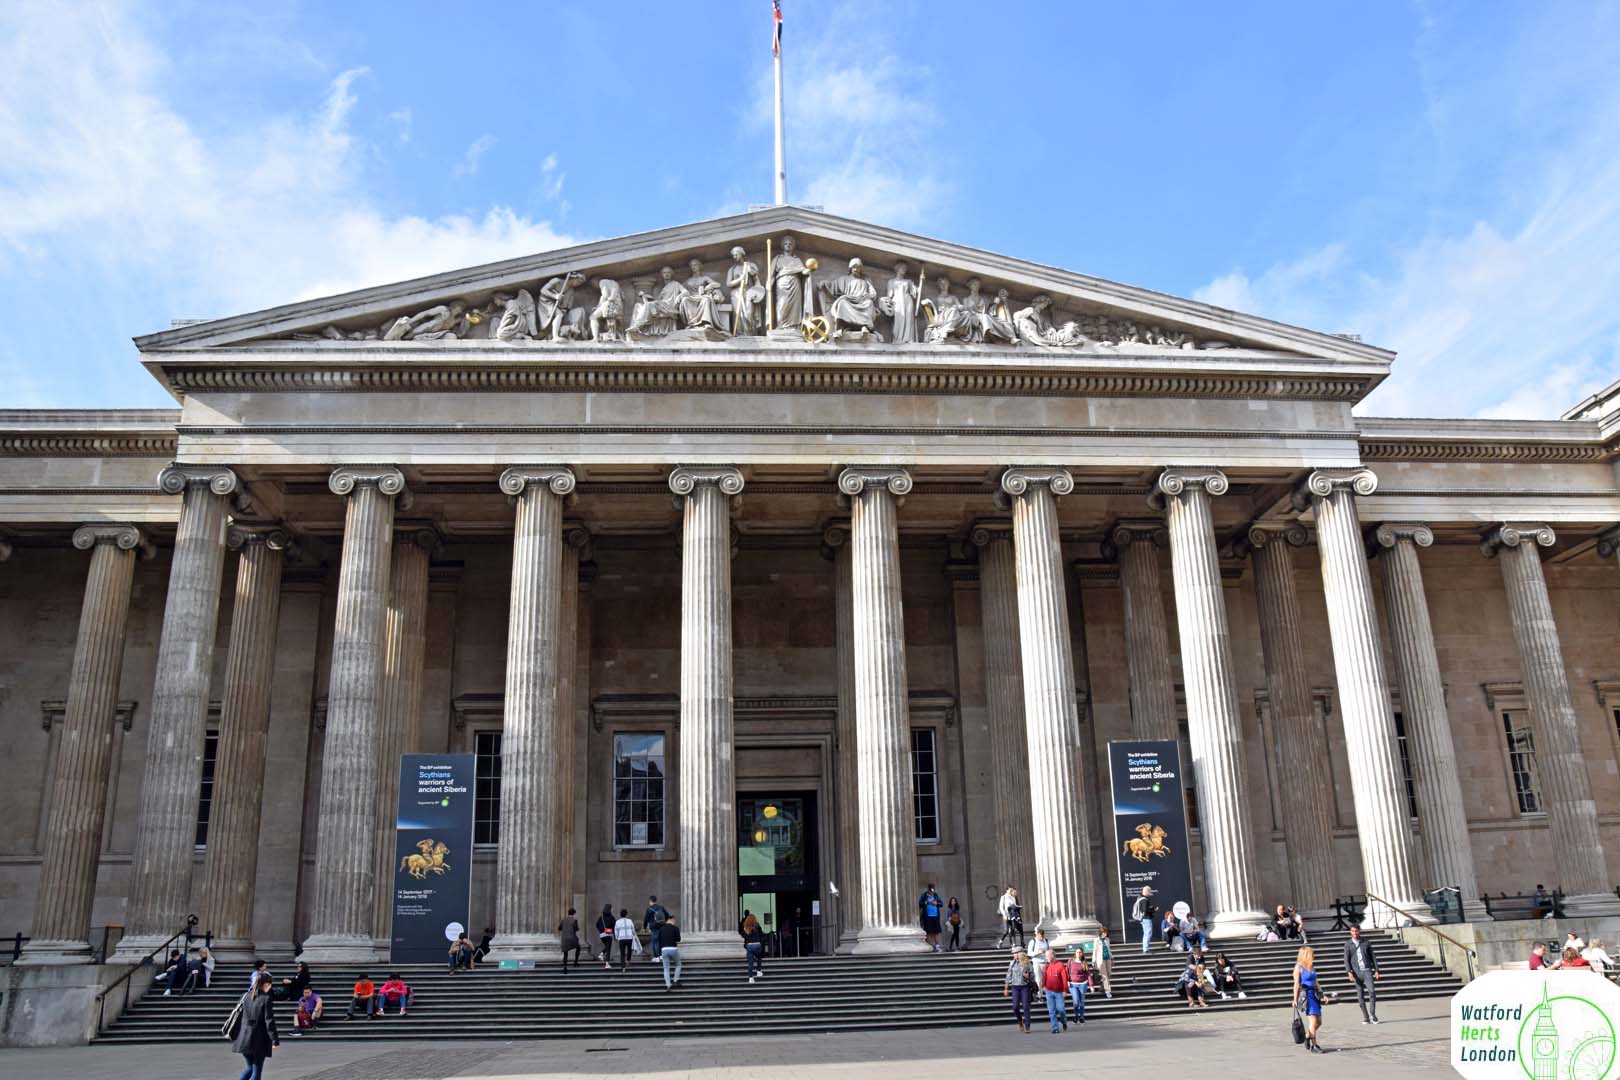 The British Museum, located in the Bloomsbury area of London